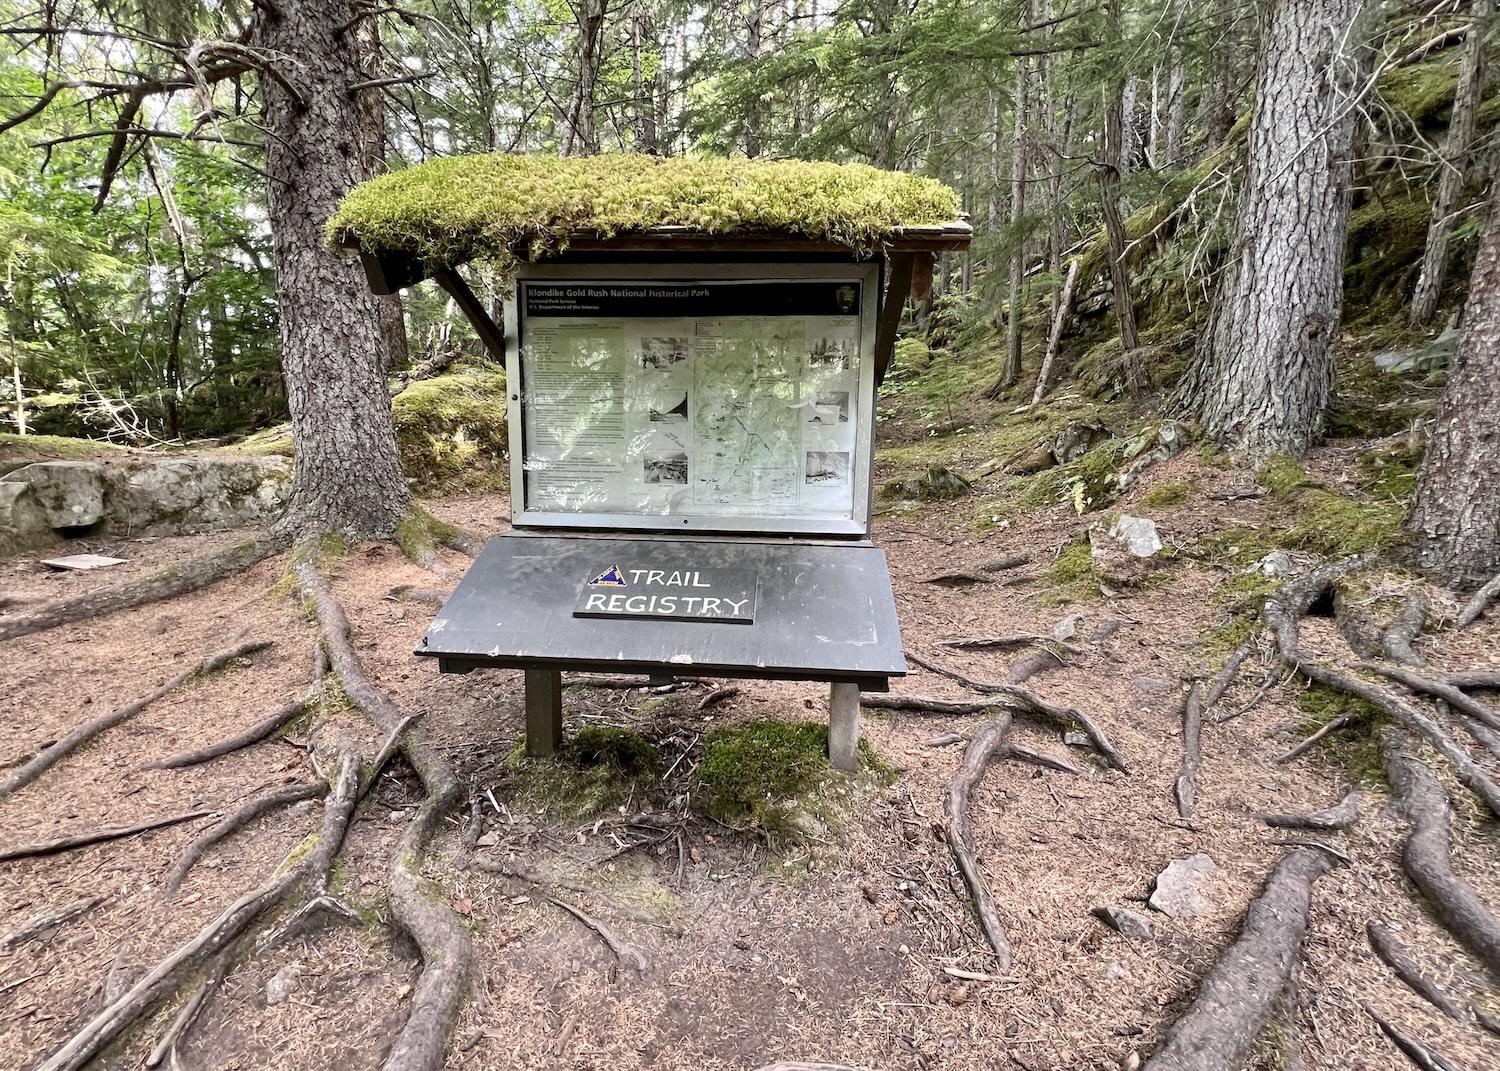 Even you only do a few minutes or hours of the Chilkoot Trail, the National Park Service asks you to sign its trail registry.